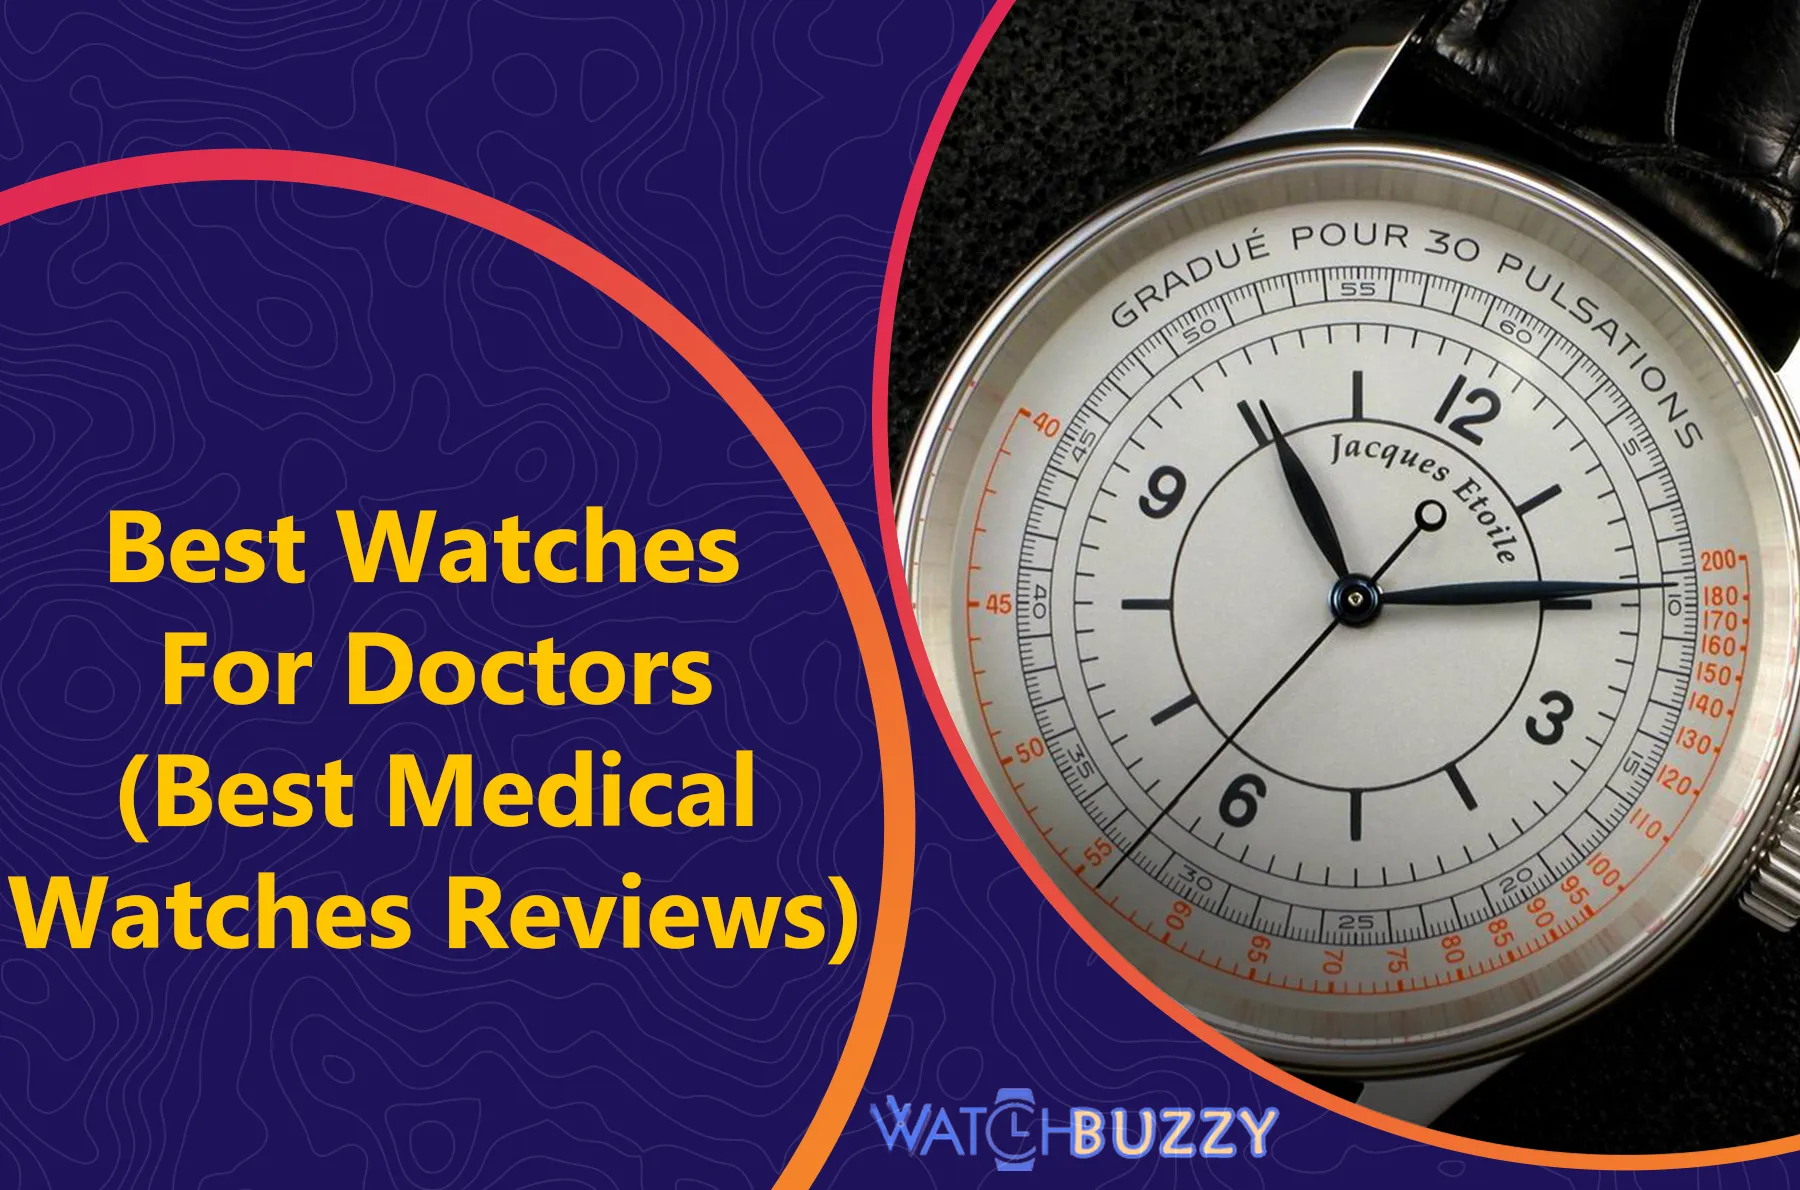 Best Watches For Doctors (Best Medical Watches Reviews)